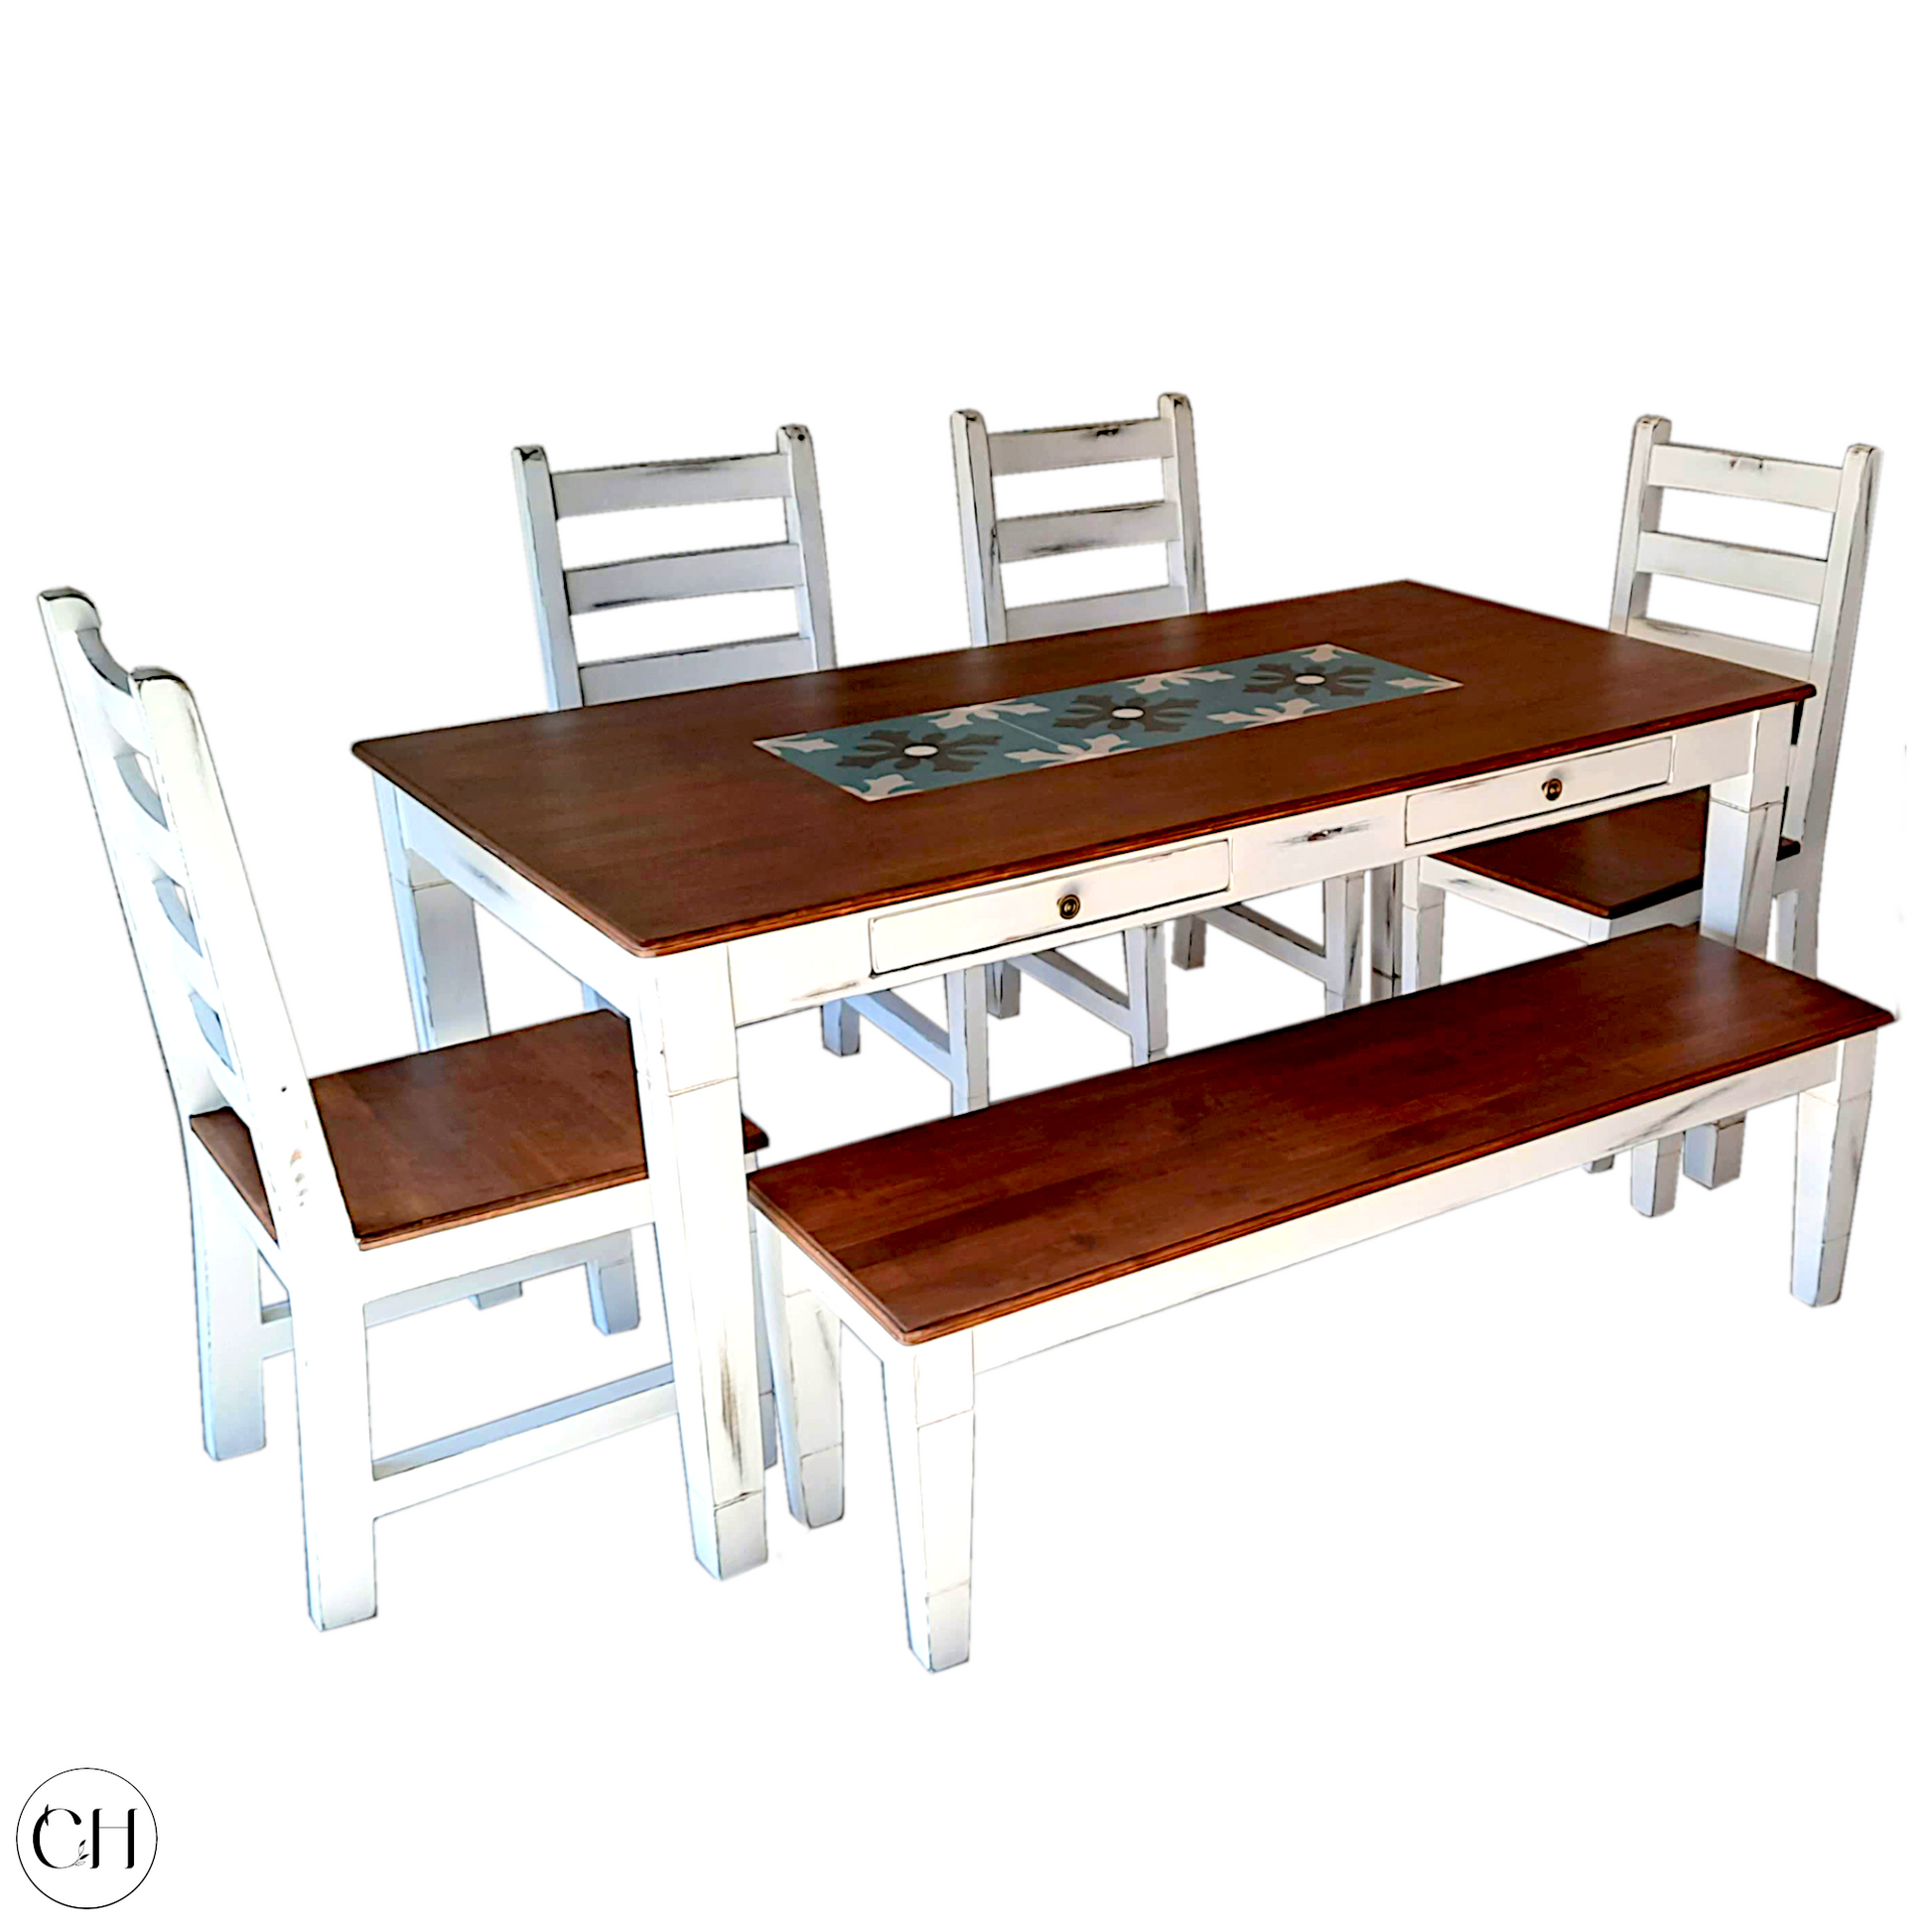 CustHum-Geranium-6 seater dining set, 4 chairs, 1 bench, cutlery drawers on table apron and embedded tiles on top (white background)